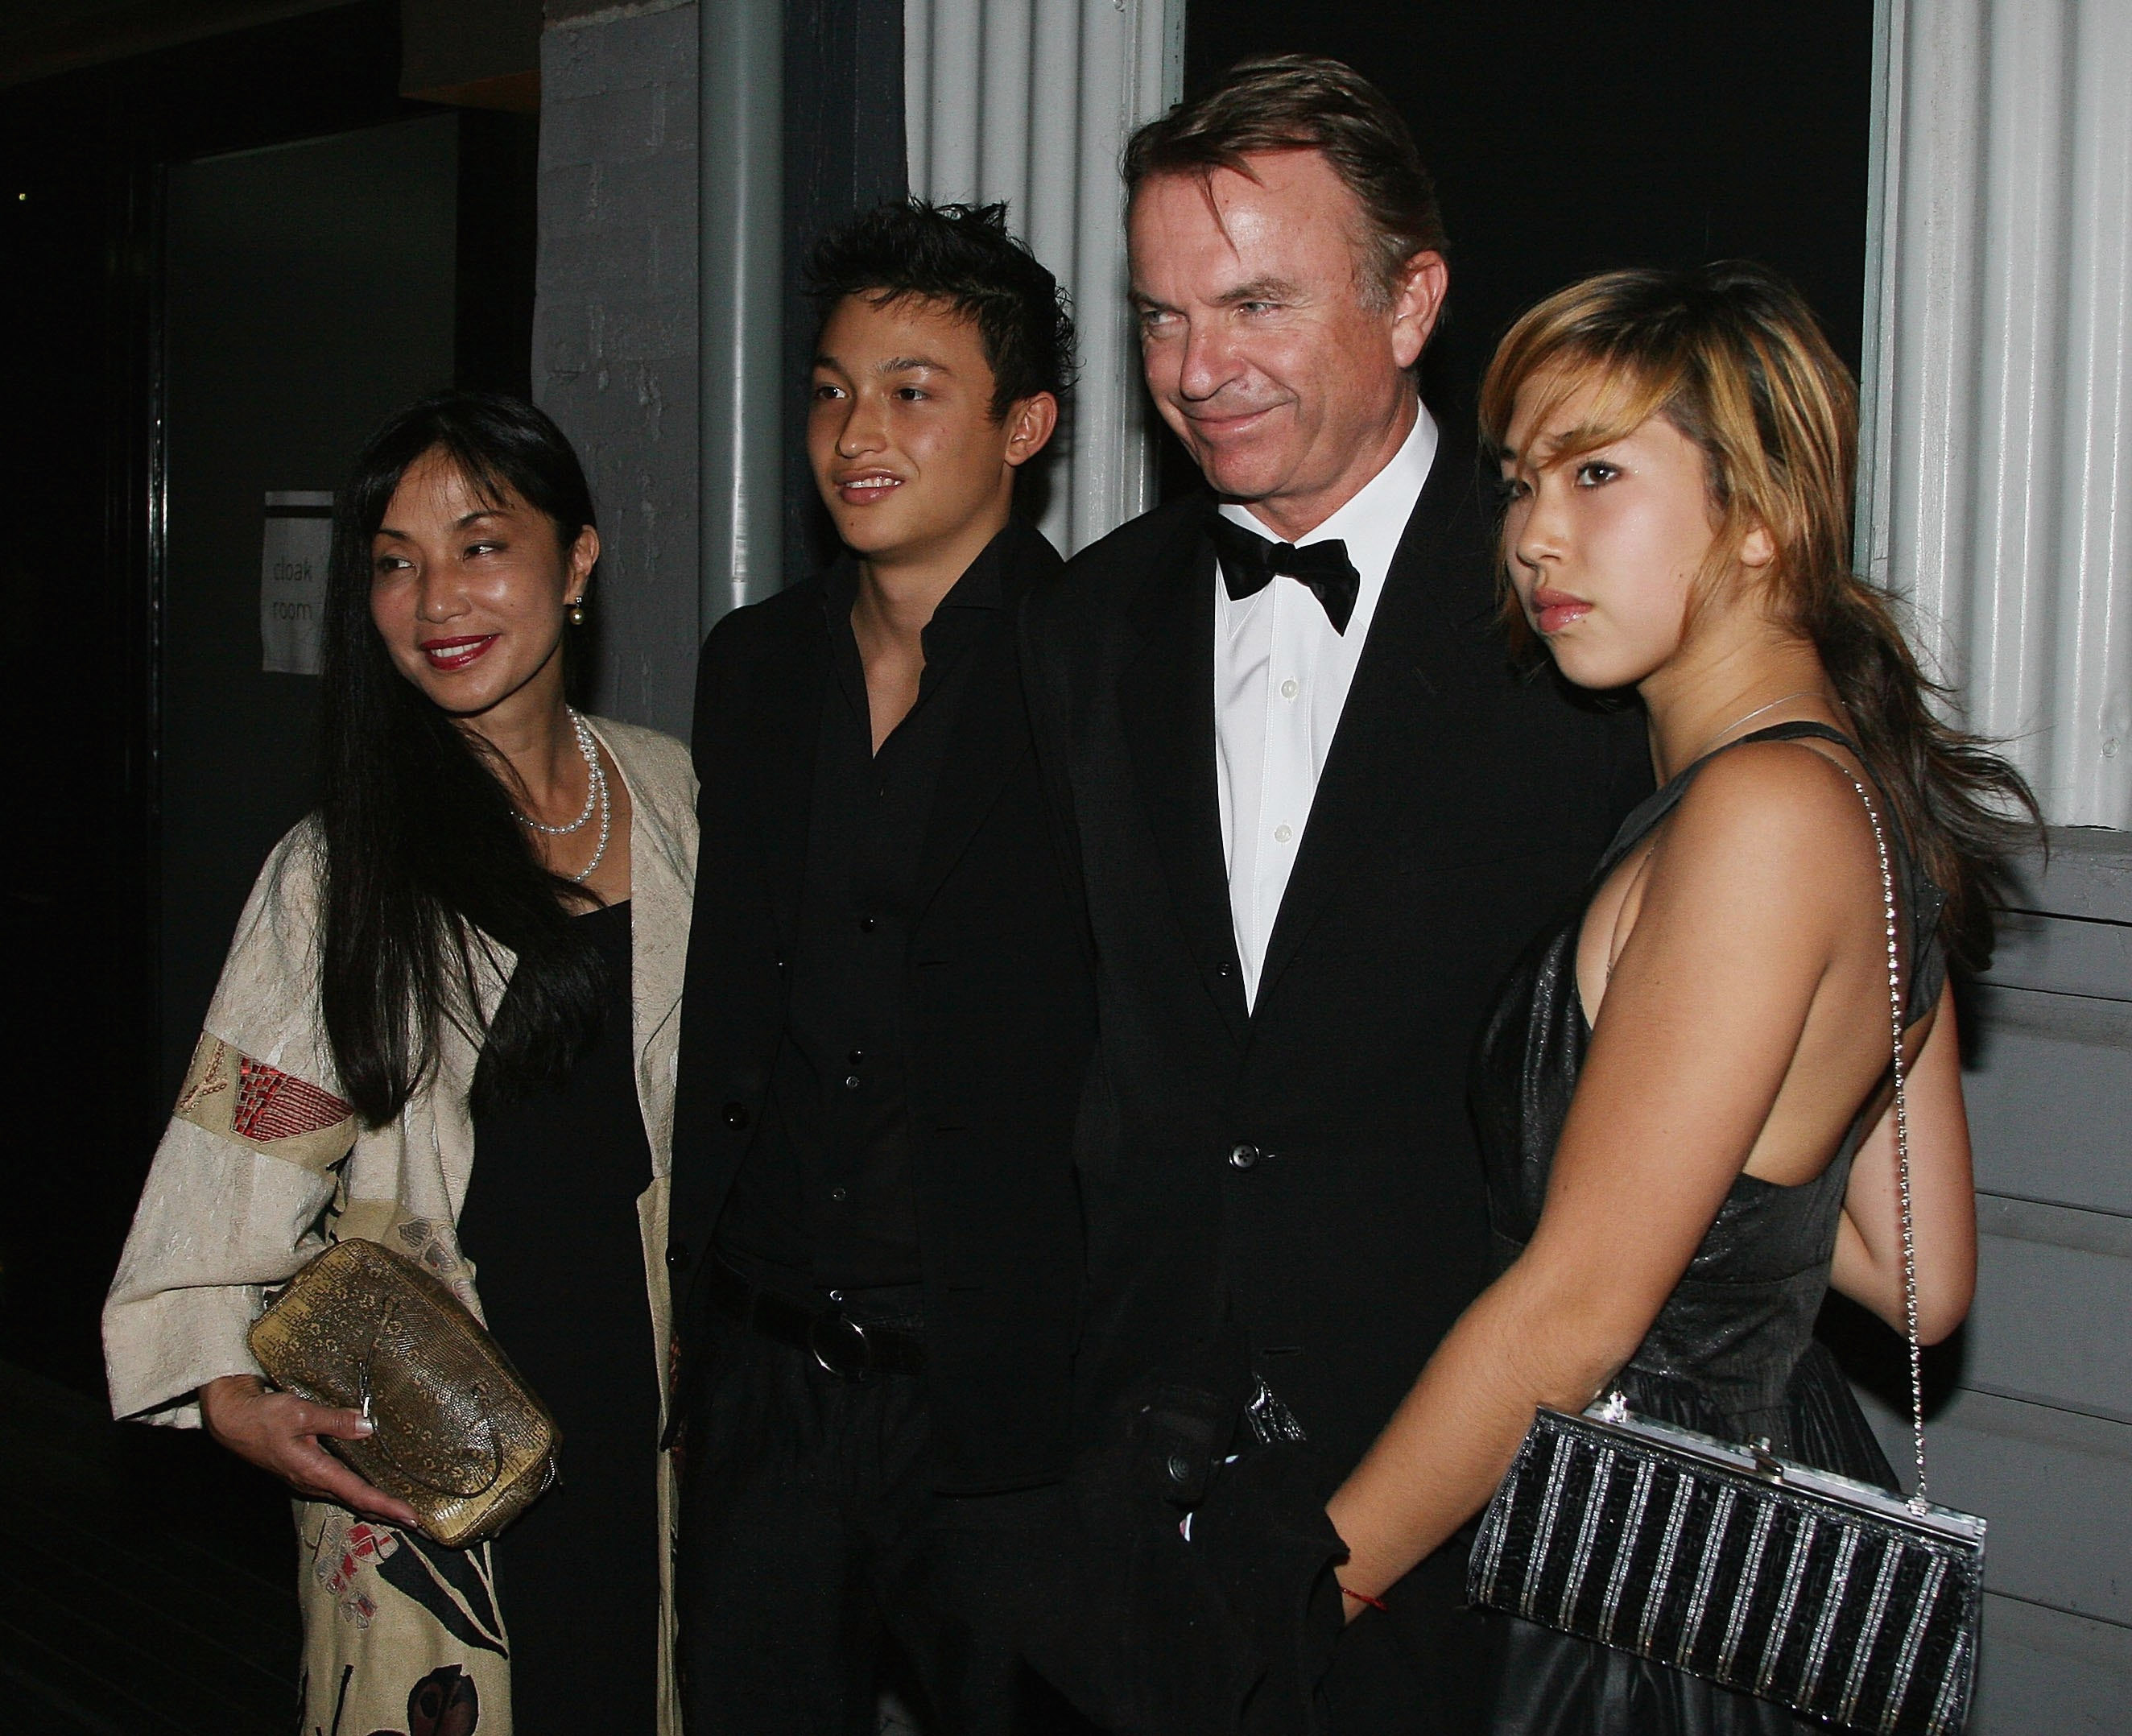 Sam Neill and family at the inaugural AFTRS (Australian Film Television & Radio School) Gala Event at Doltone House Pyrmont on April 16, 2007 in Sydney, Australia. | Source: Getty Images